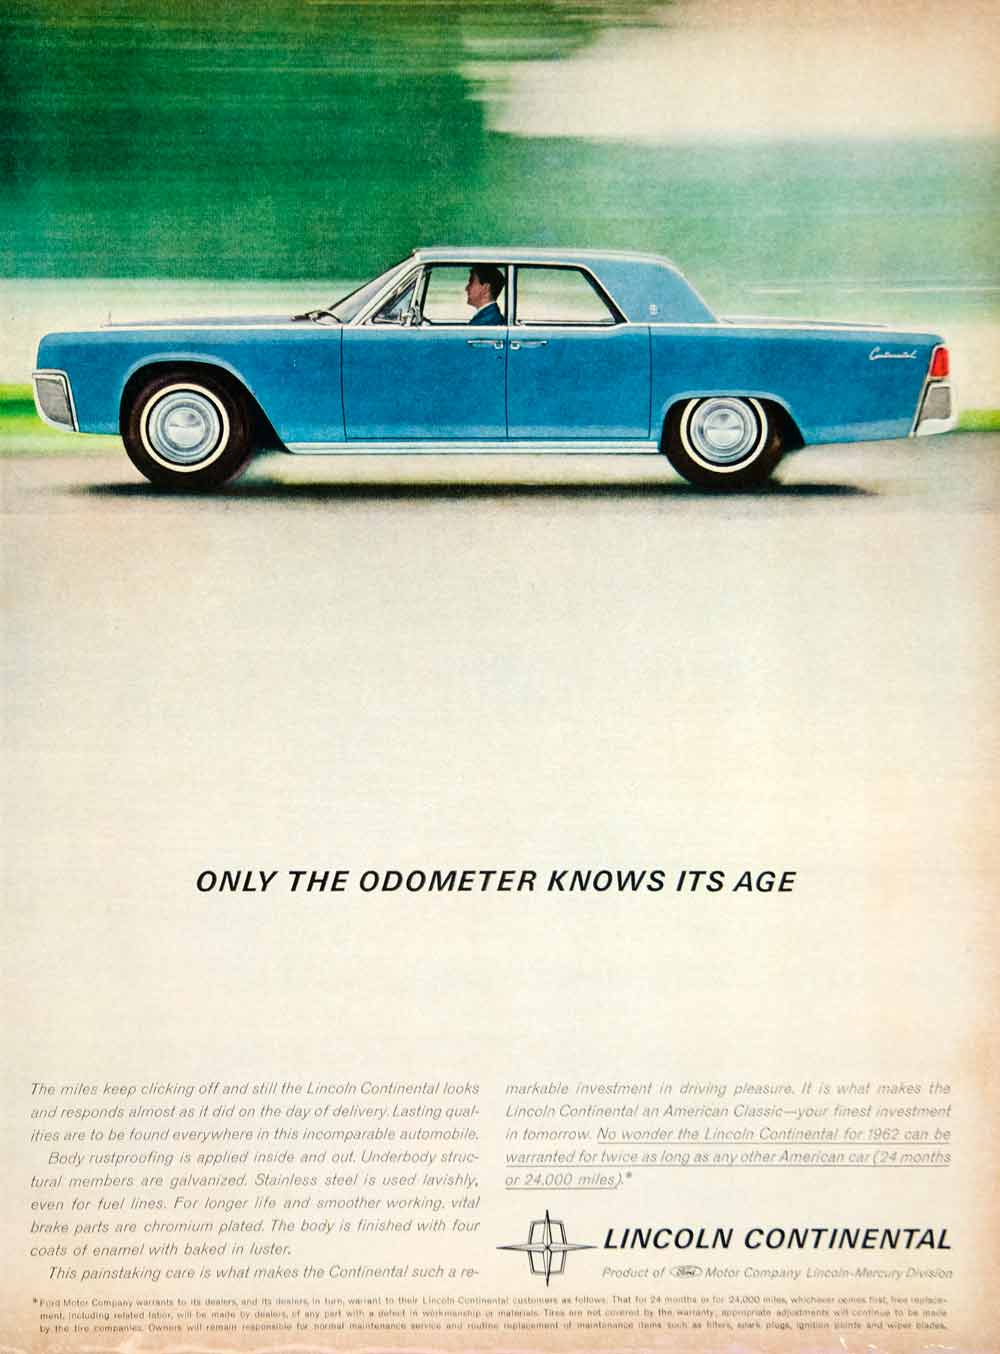 1961 Ad Vintage 1962 Lincoln Continental Blue Automobile Ford Car Four Door YMM4